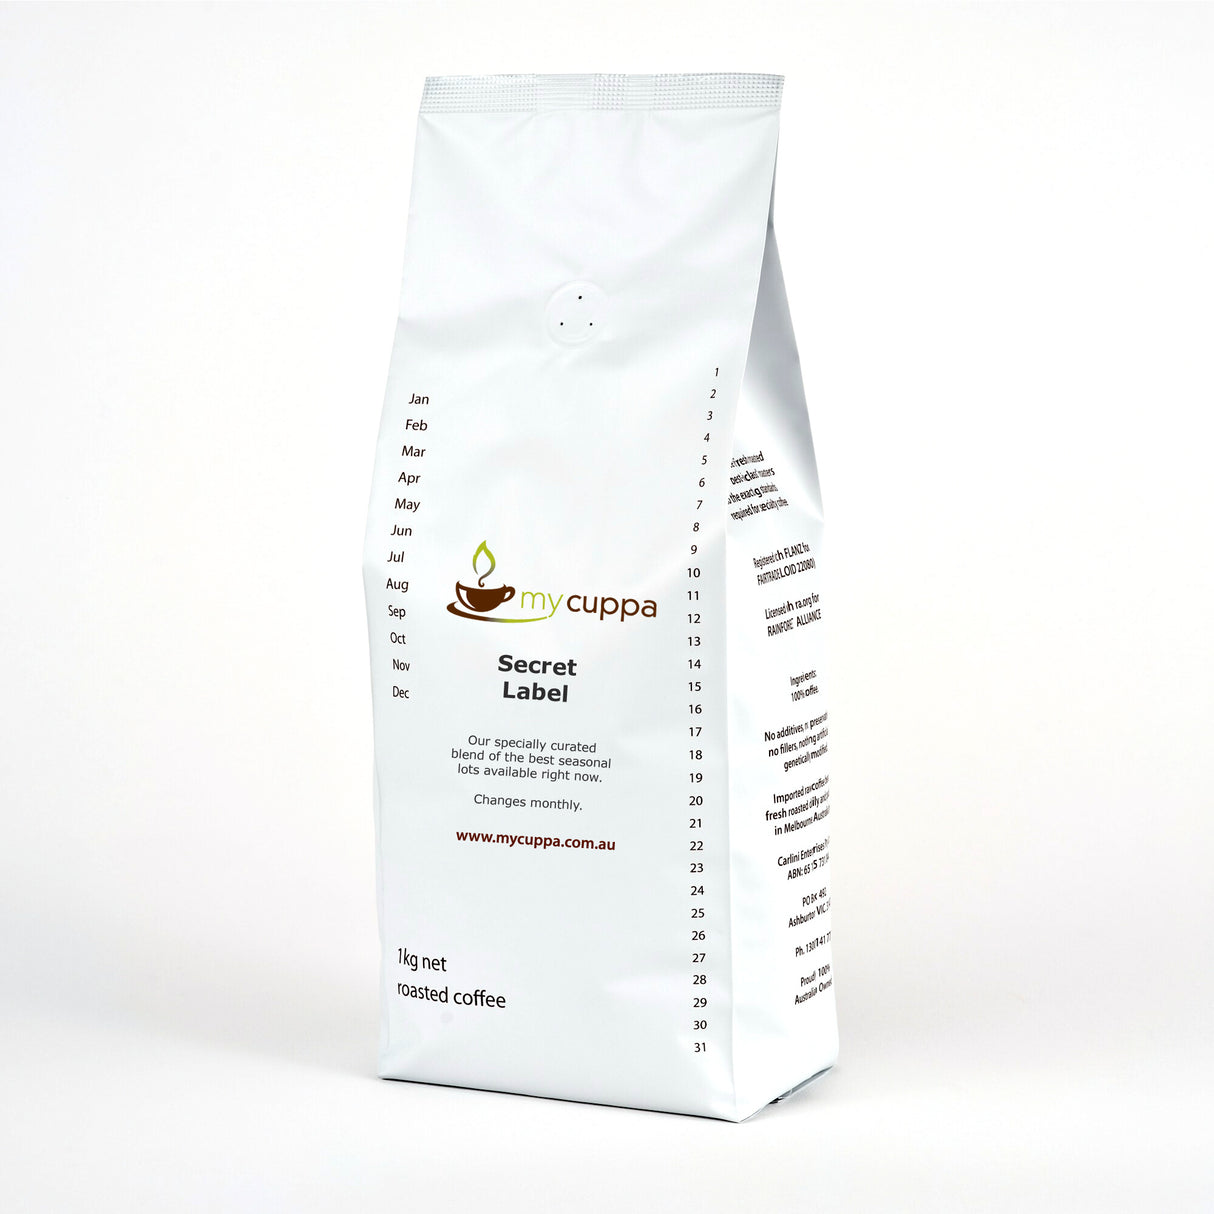 mycuppa Secret Label is Australia's favorite coffee surprise. Changes monthly.